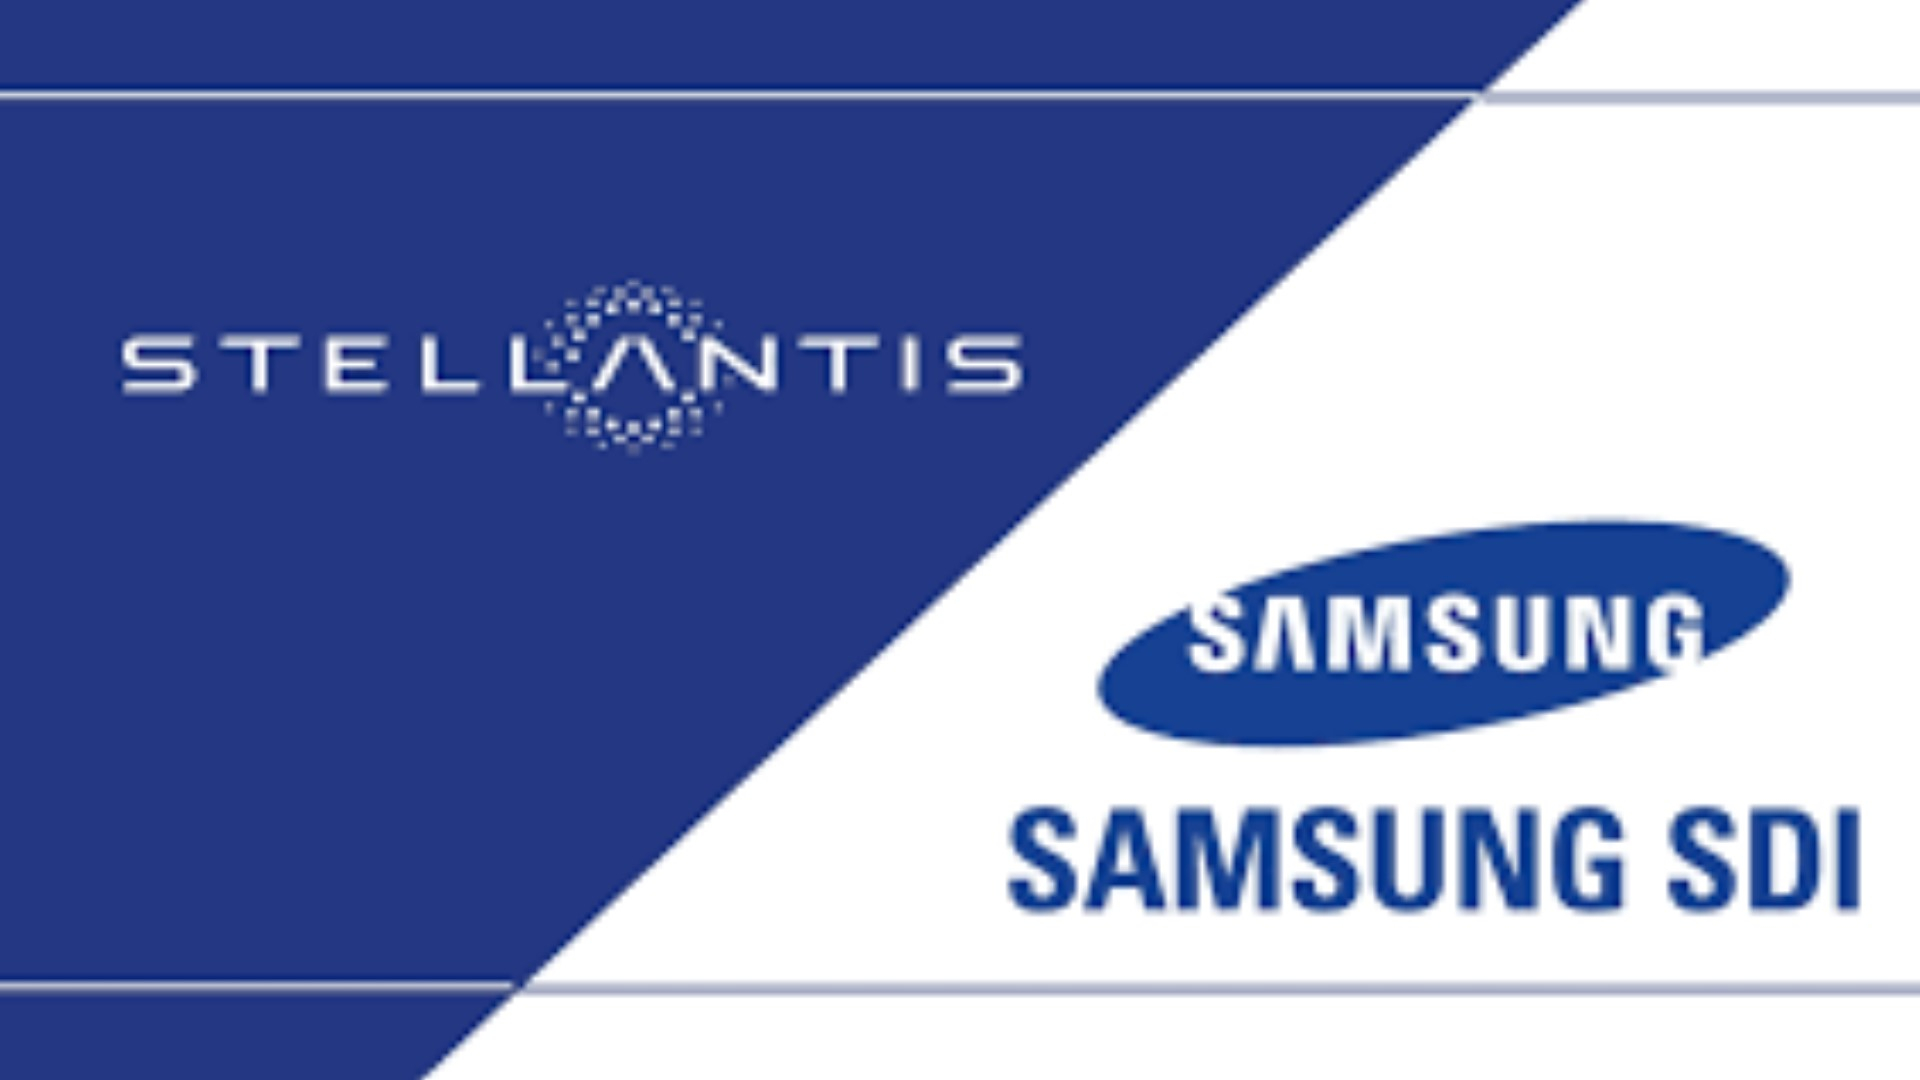 Second Battery Facility Investment from Stellantis and Samsung SDI to the USA